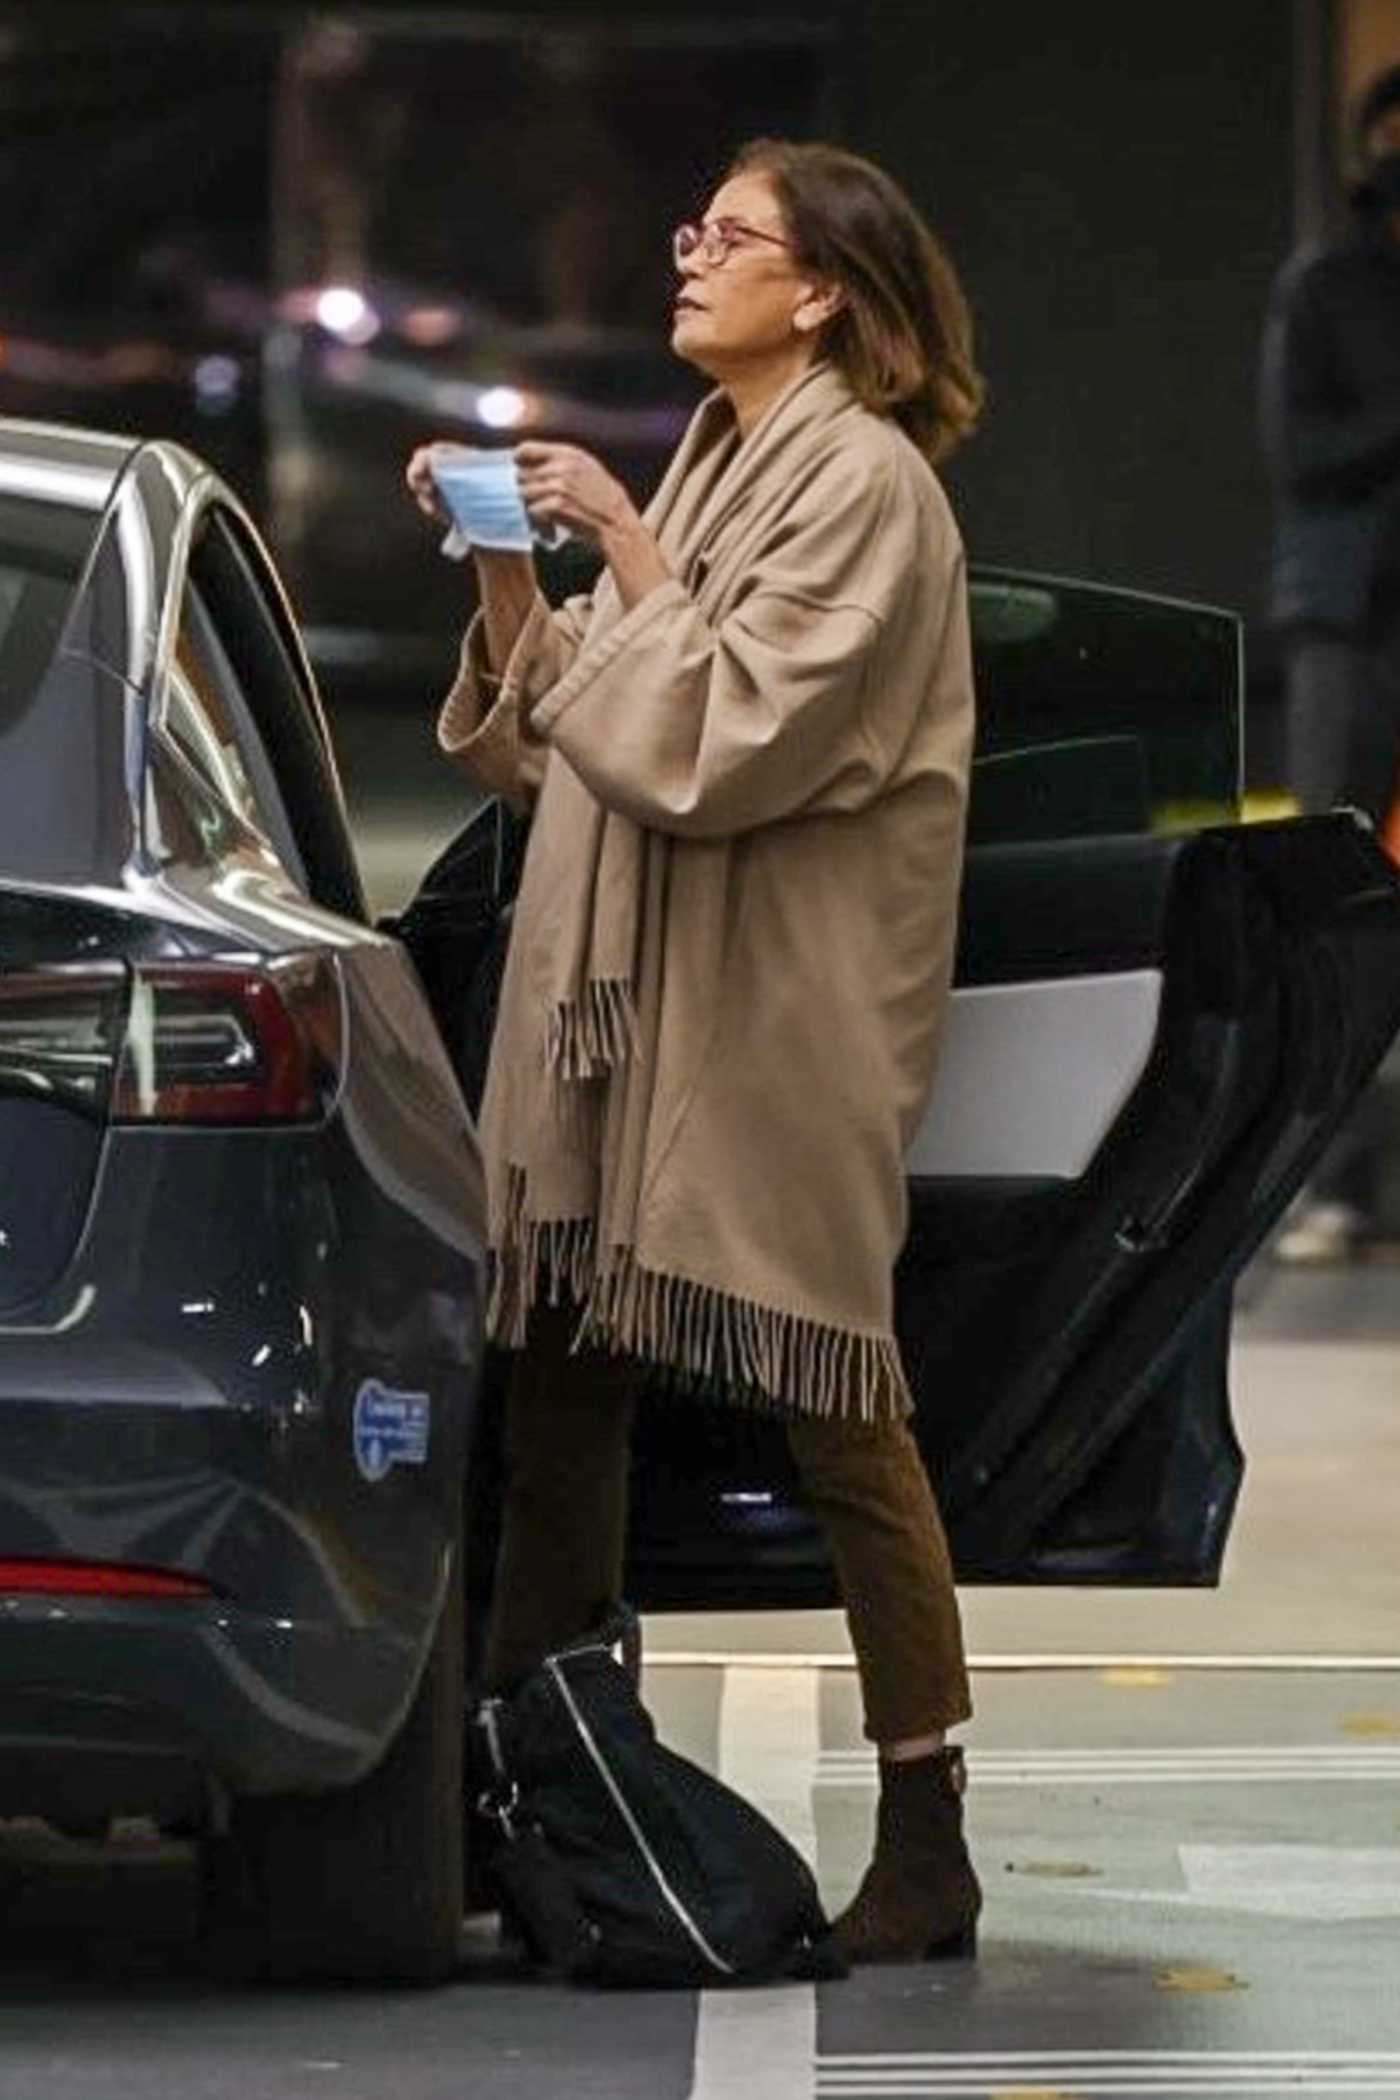 Teri Hatcher in a Beige Cardigan Arrives to a Business Meeting in West Hollywood 02/01/2022